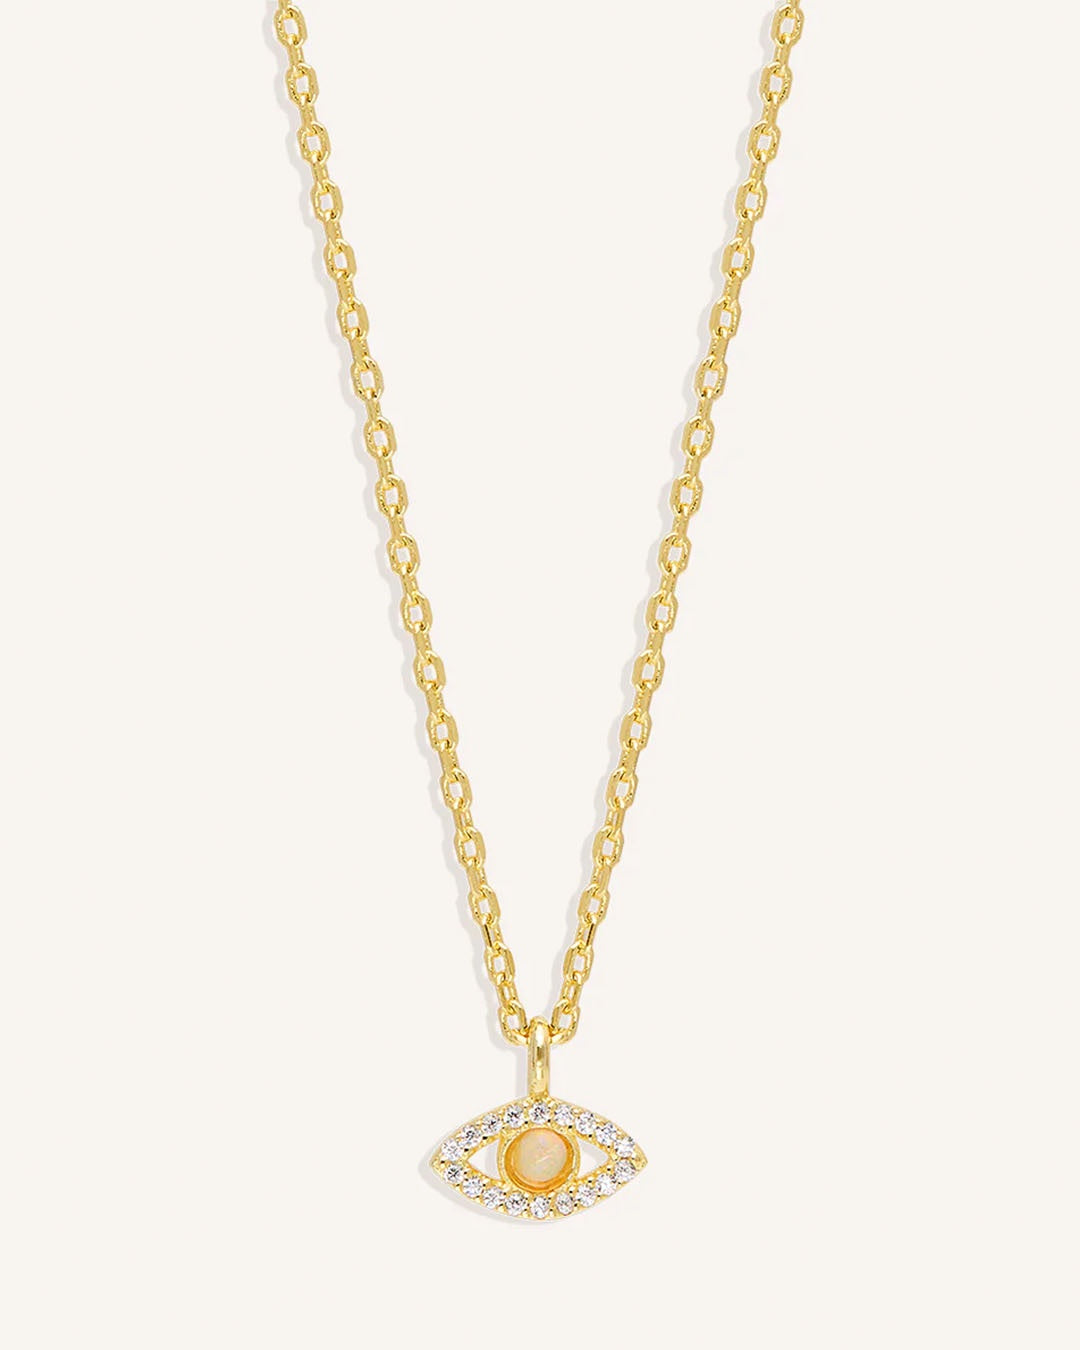 Gold Eye of Intuition Necklace Necklaces by By Charlotte - Prae Store